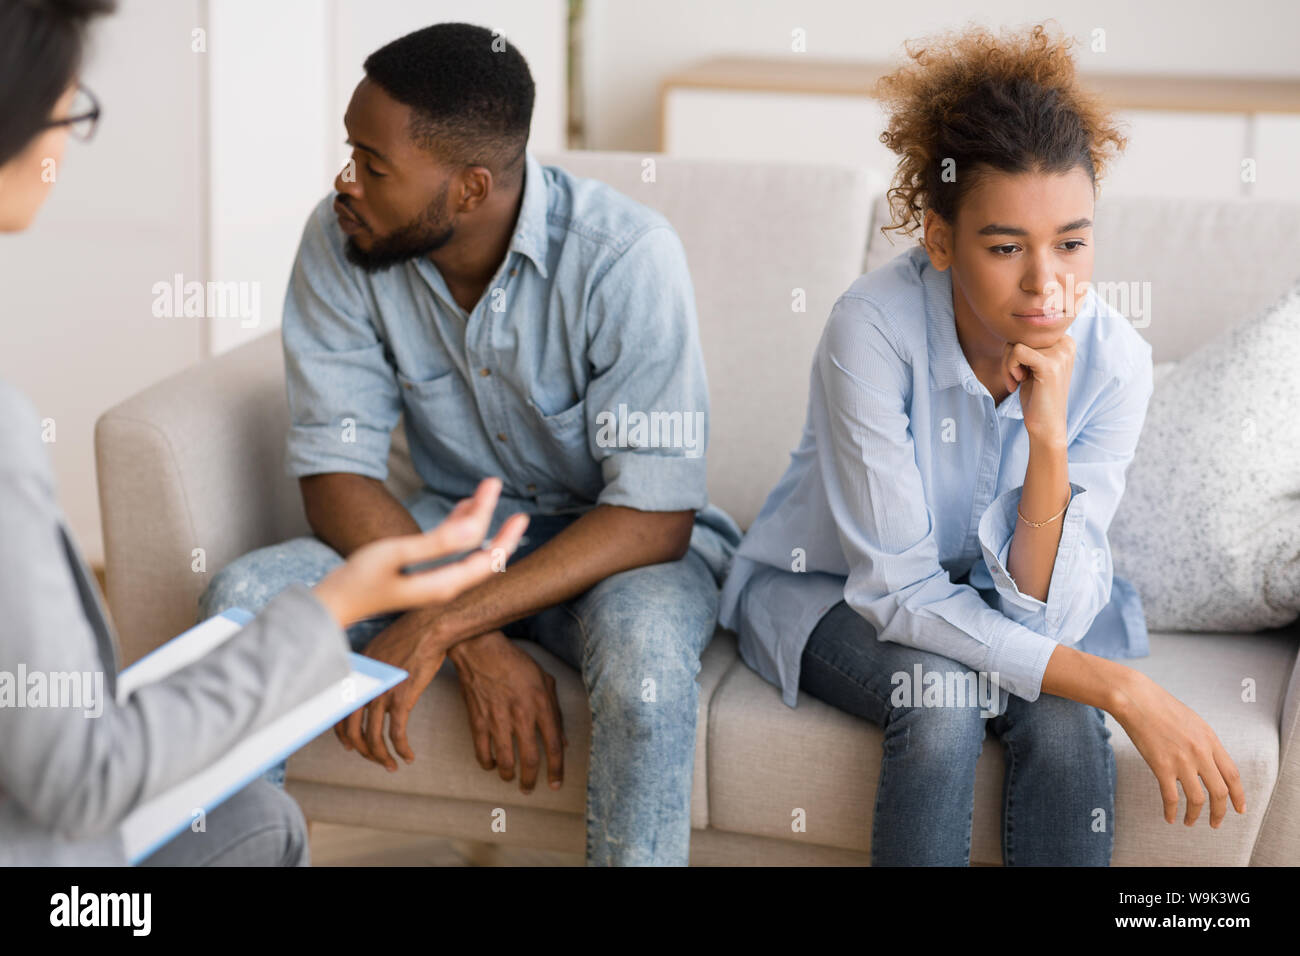 Frustrated Afro Couple Avoiding Eye Contact Sitting At Therapist's Office Stock Photo